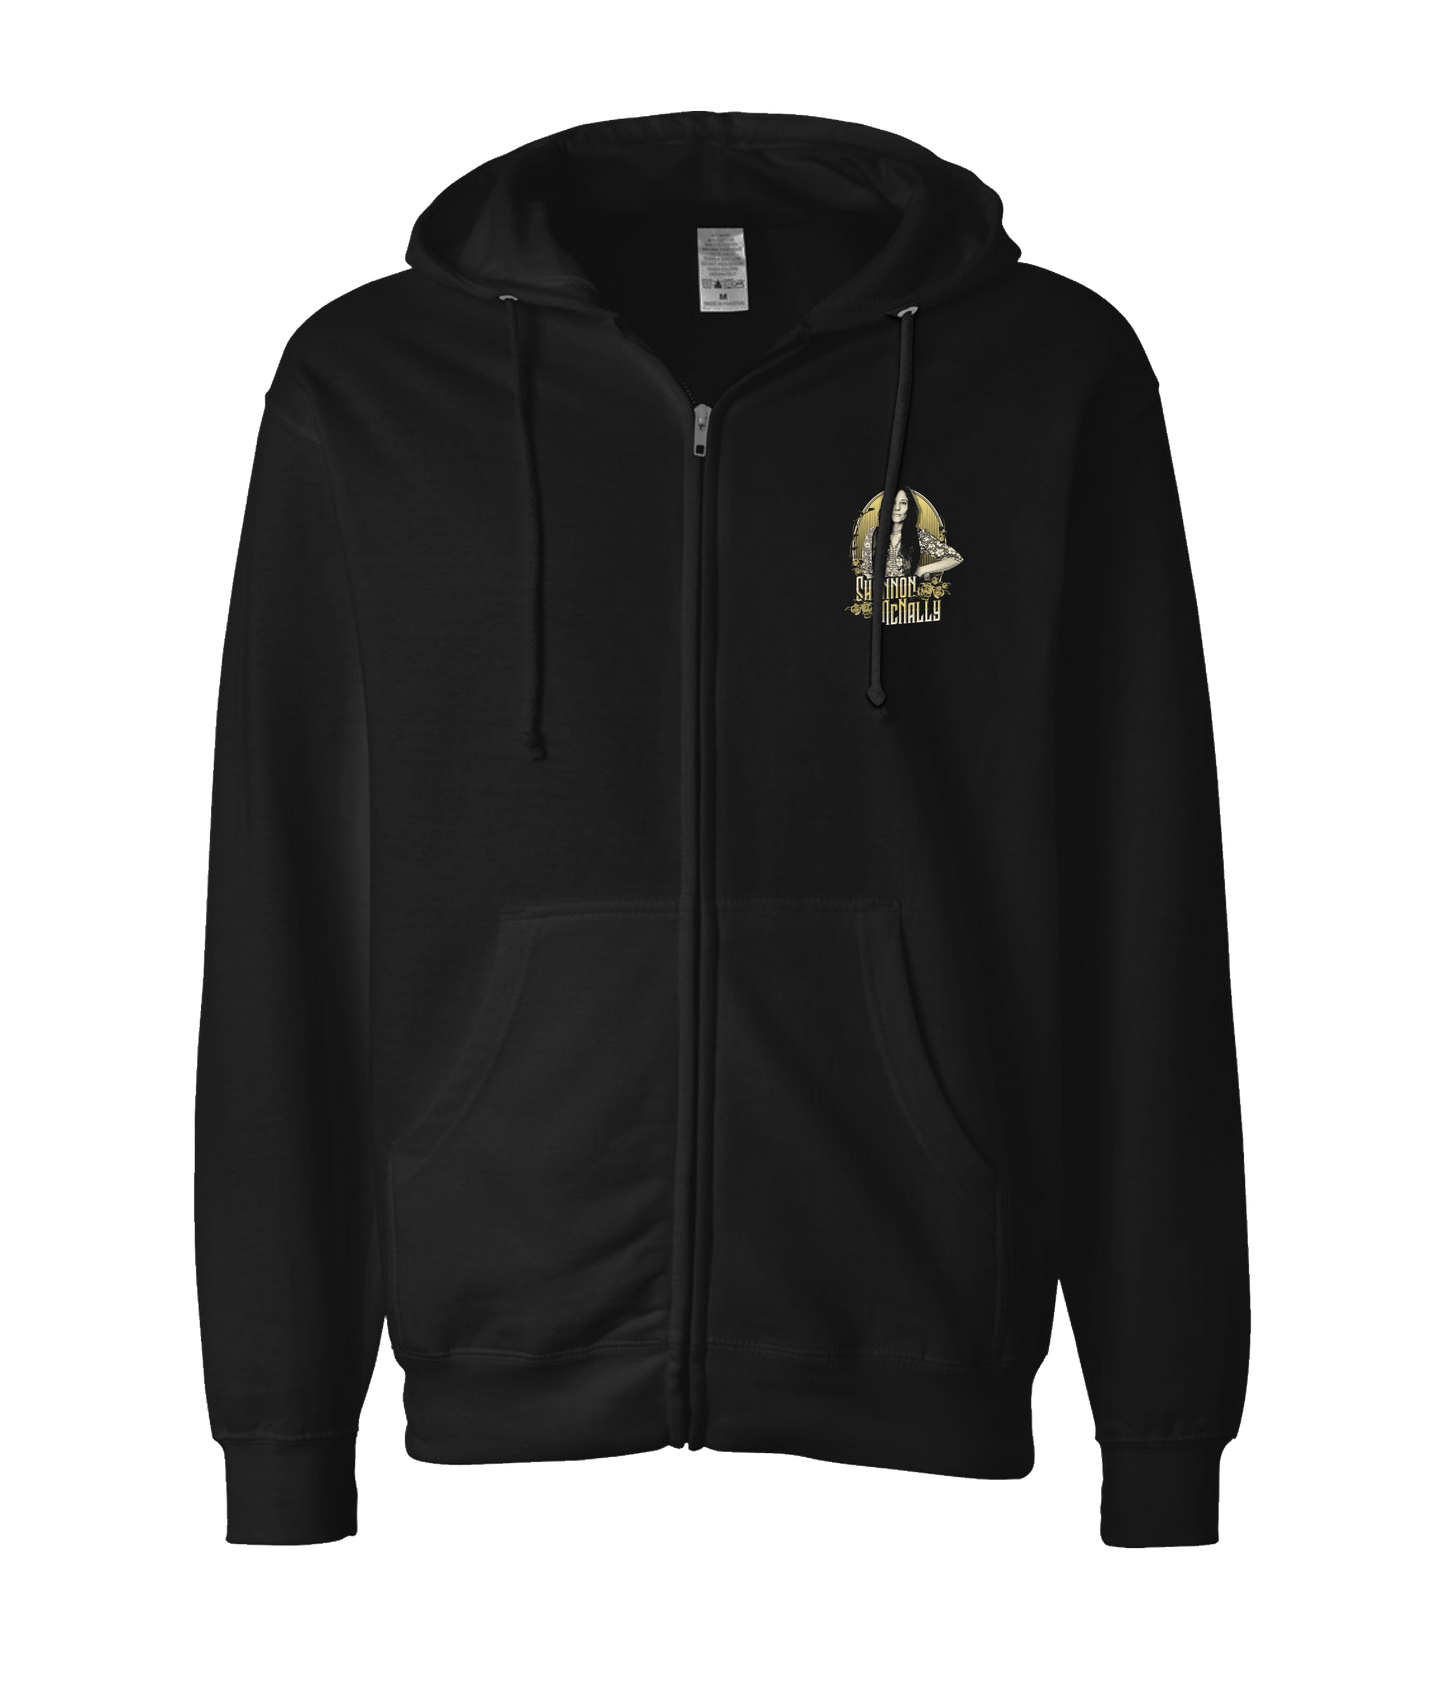 Shannon McNally - Shannon - Black Zip Up Hoodie